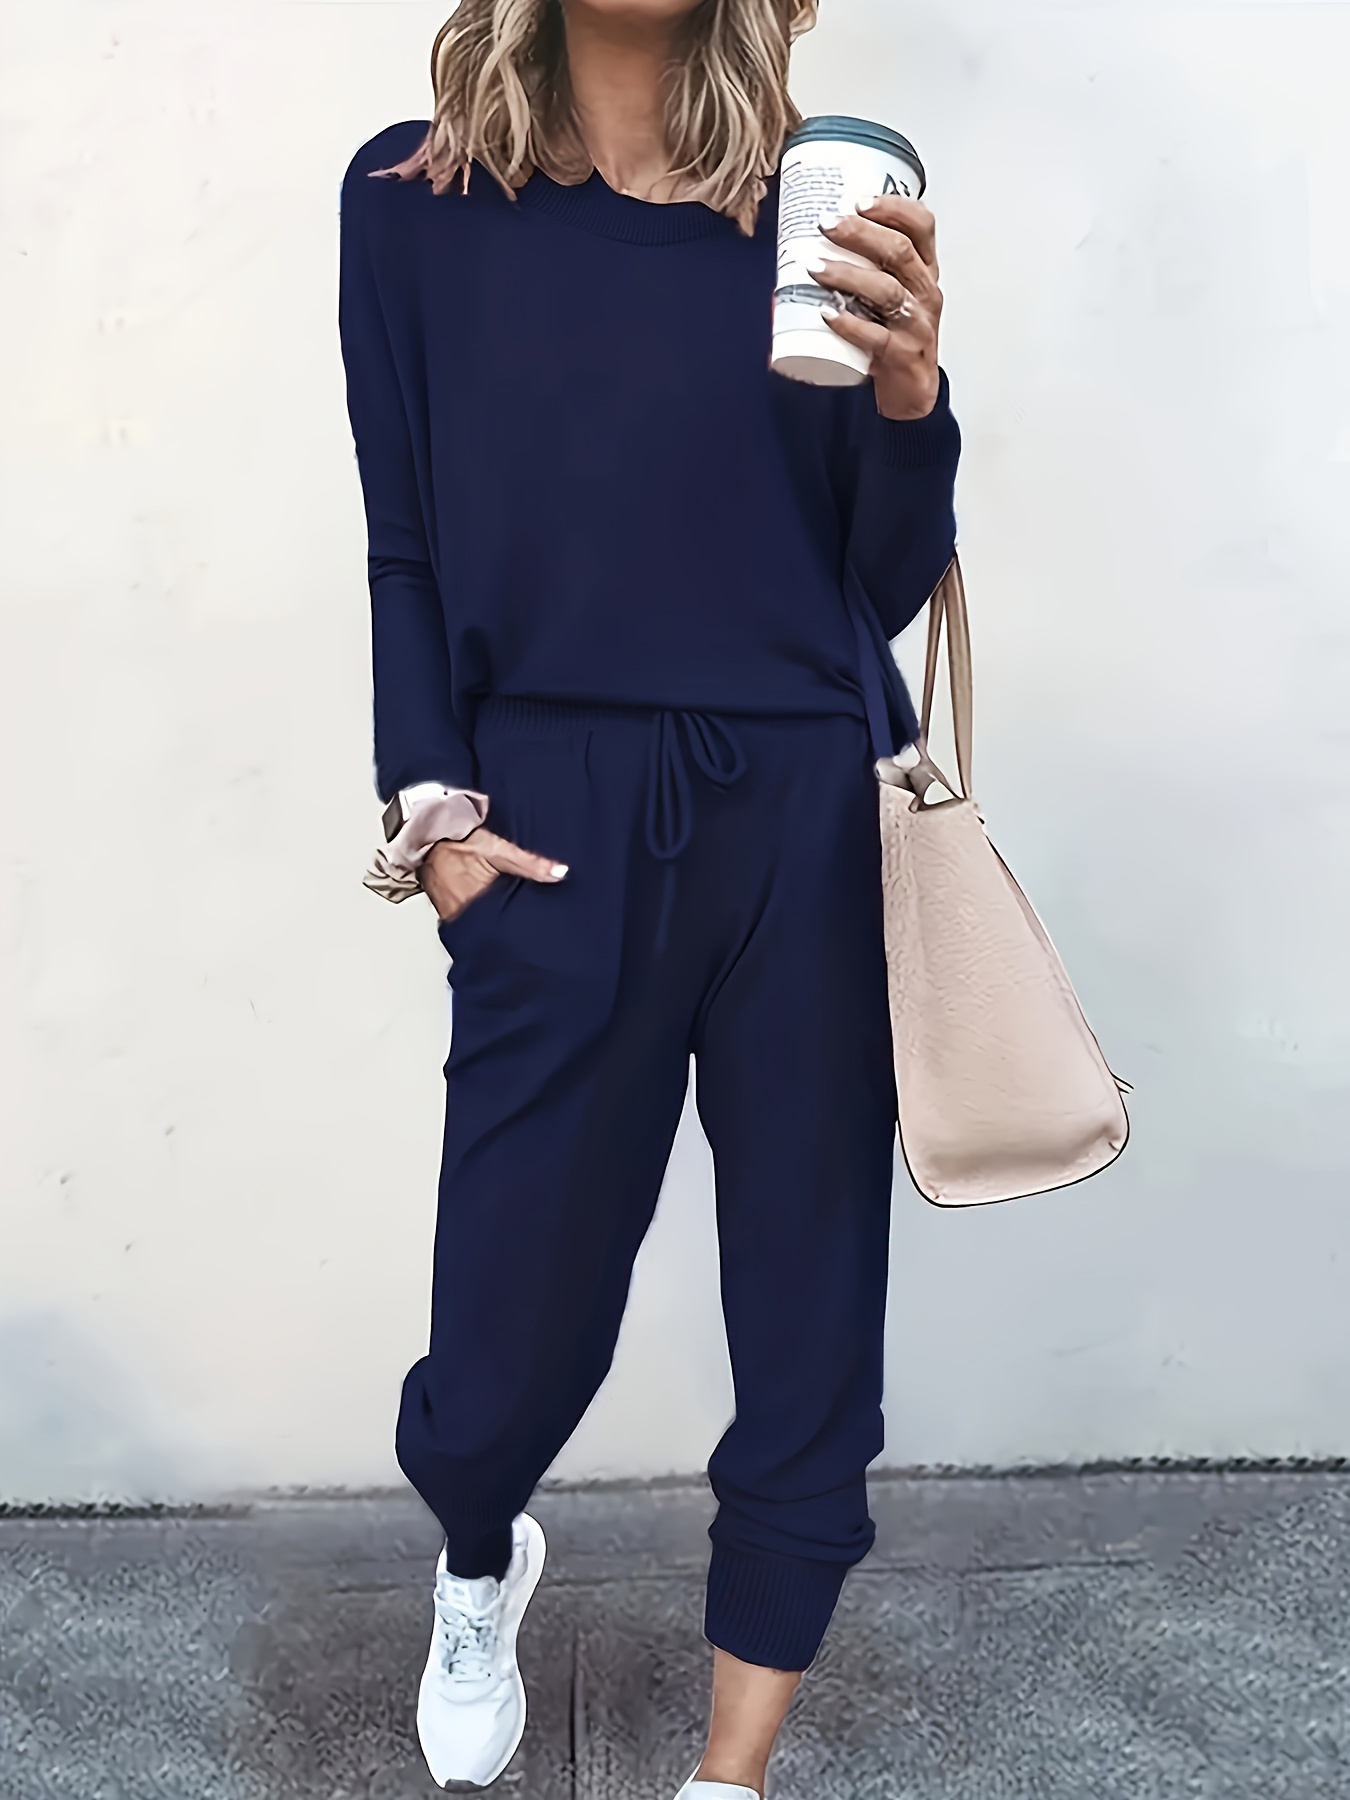 Navy Dress Pants Fall Outfits For Women (19 ideas & outfits